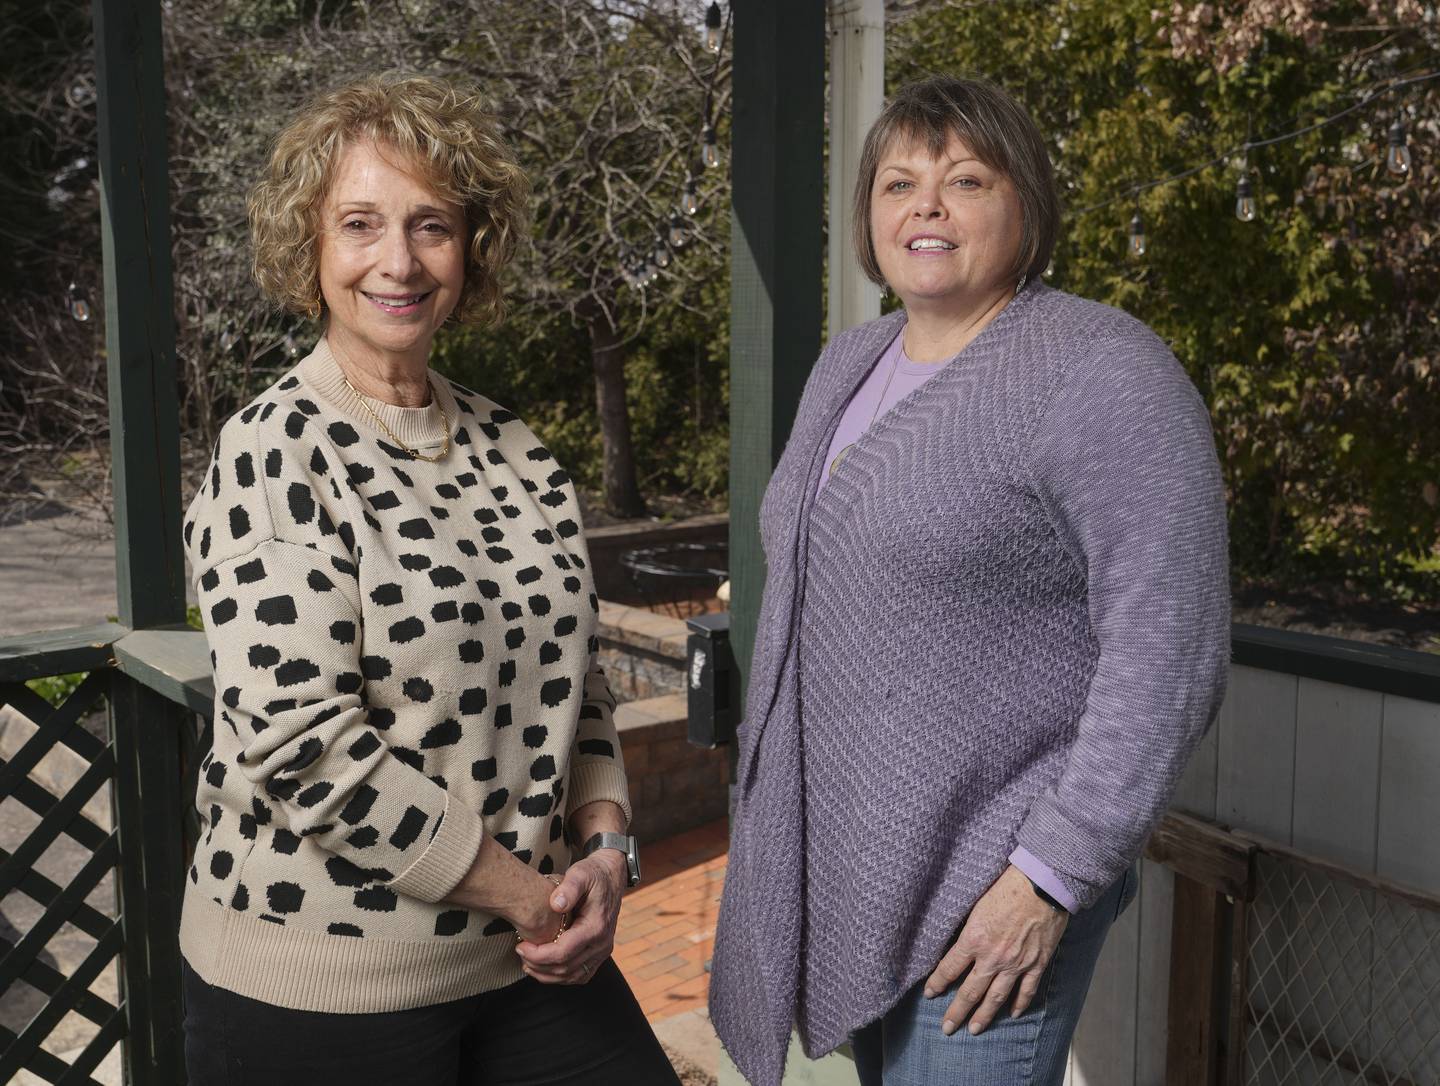 Patti White and Lee Anderson, co-founders of the Annapolis Film Festival pose for a portrait outside their office in Annapolis, Tuesday, March 21, 2023.